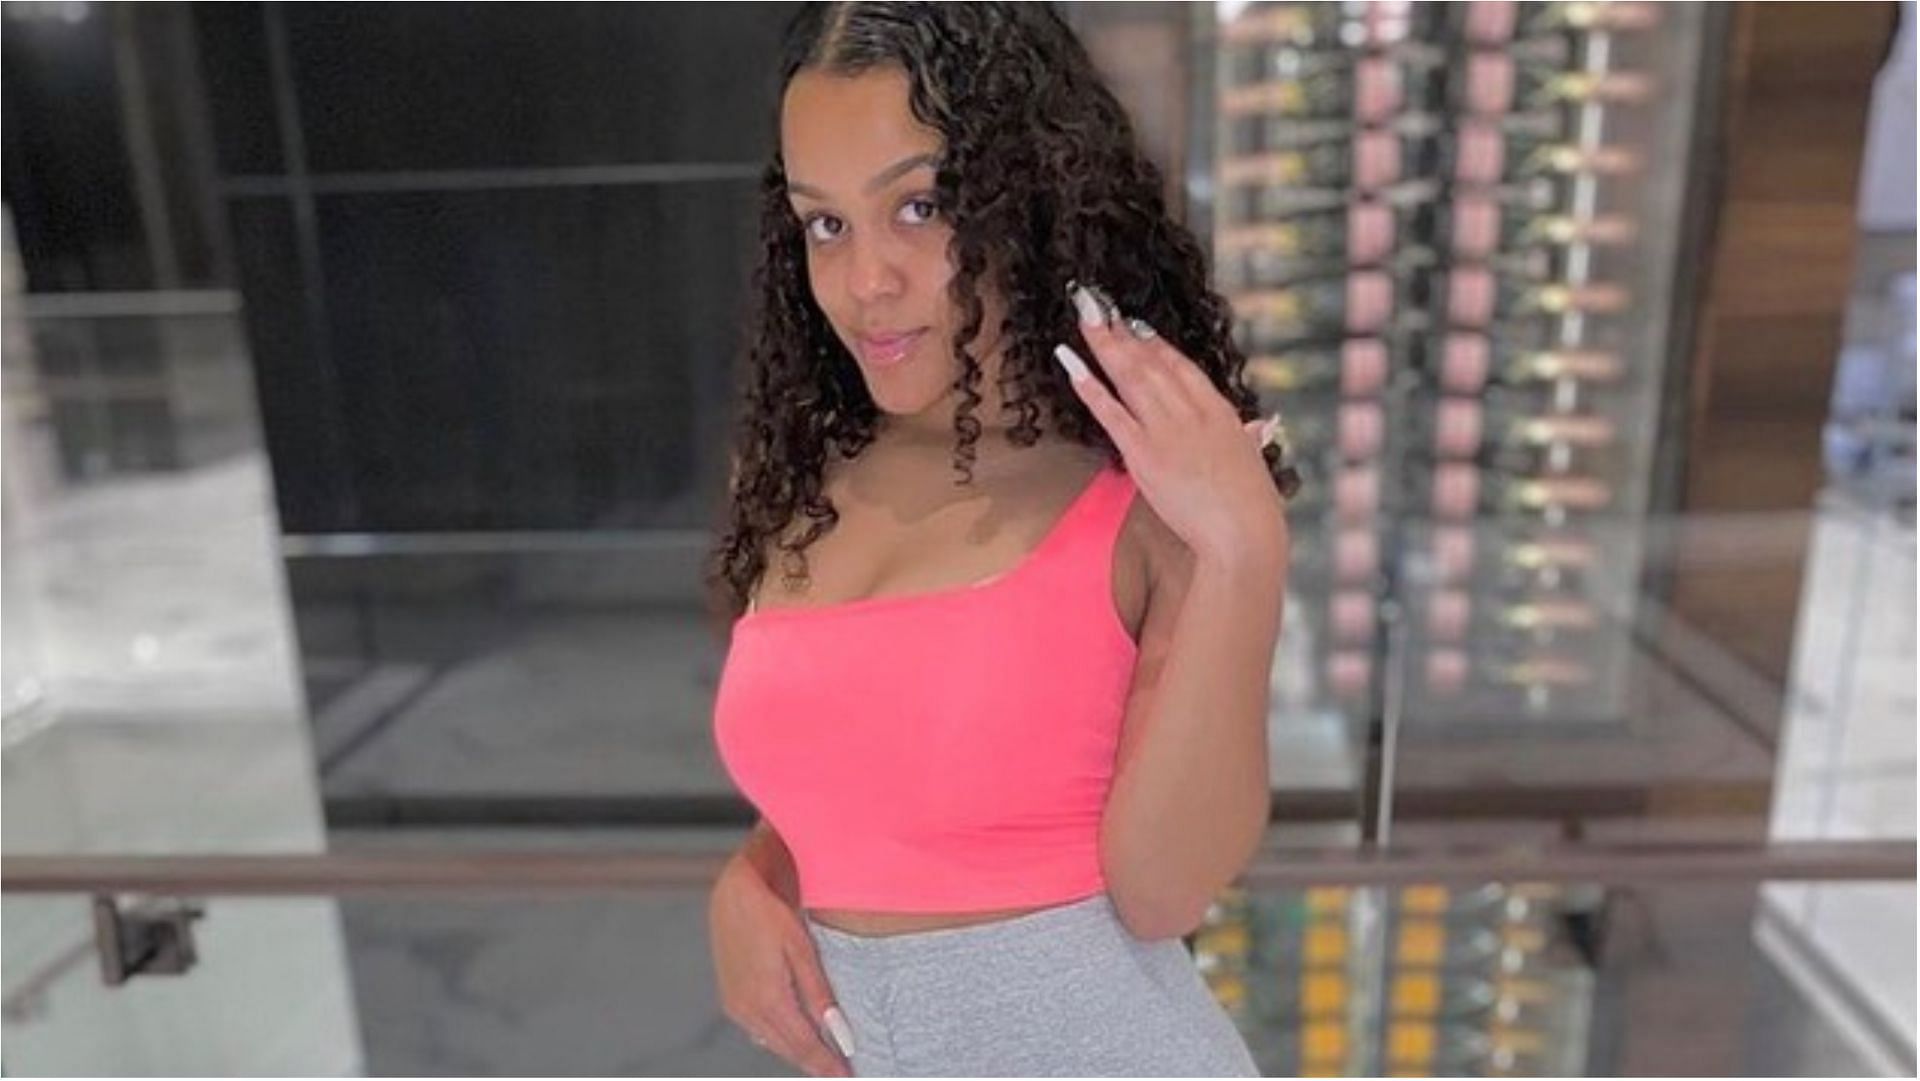 Jazzlyn Mychelle is famous for her social media content (Image via @jazlyn.mychelle/Instagram)